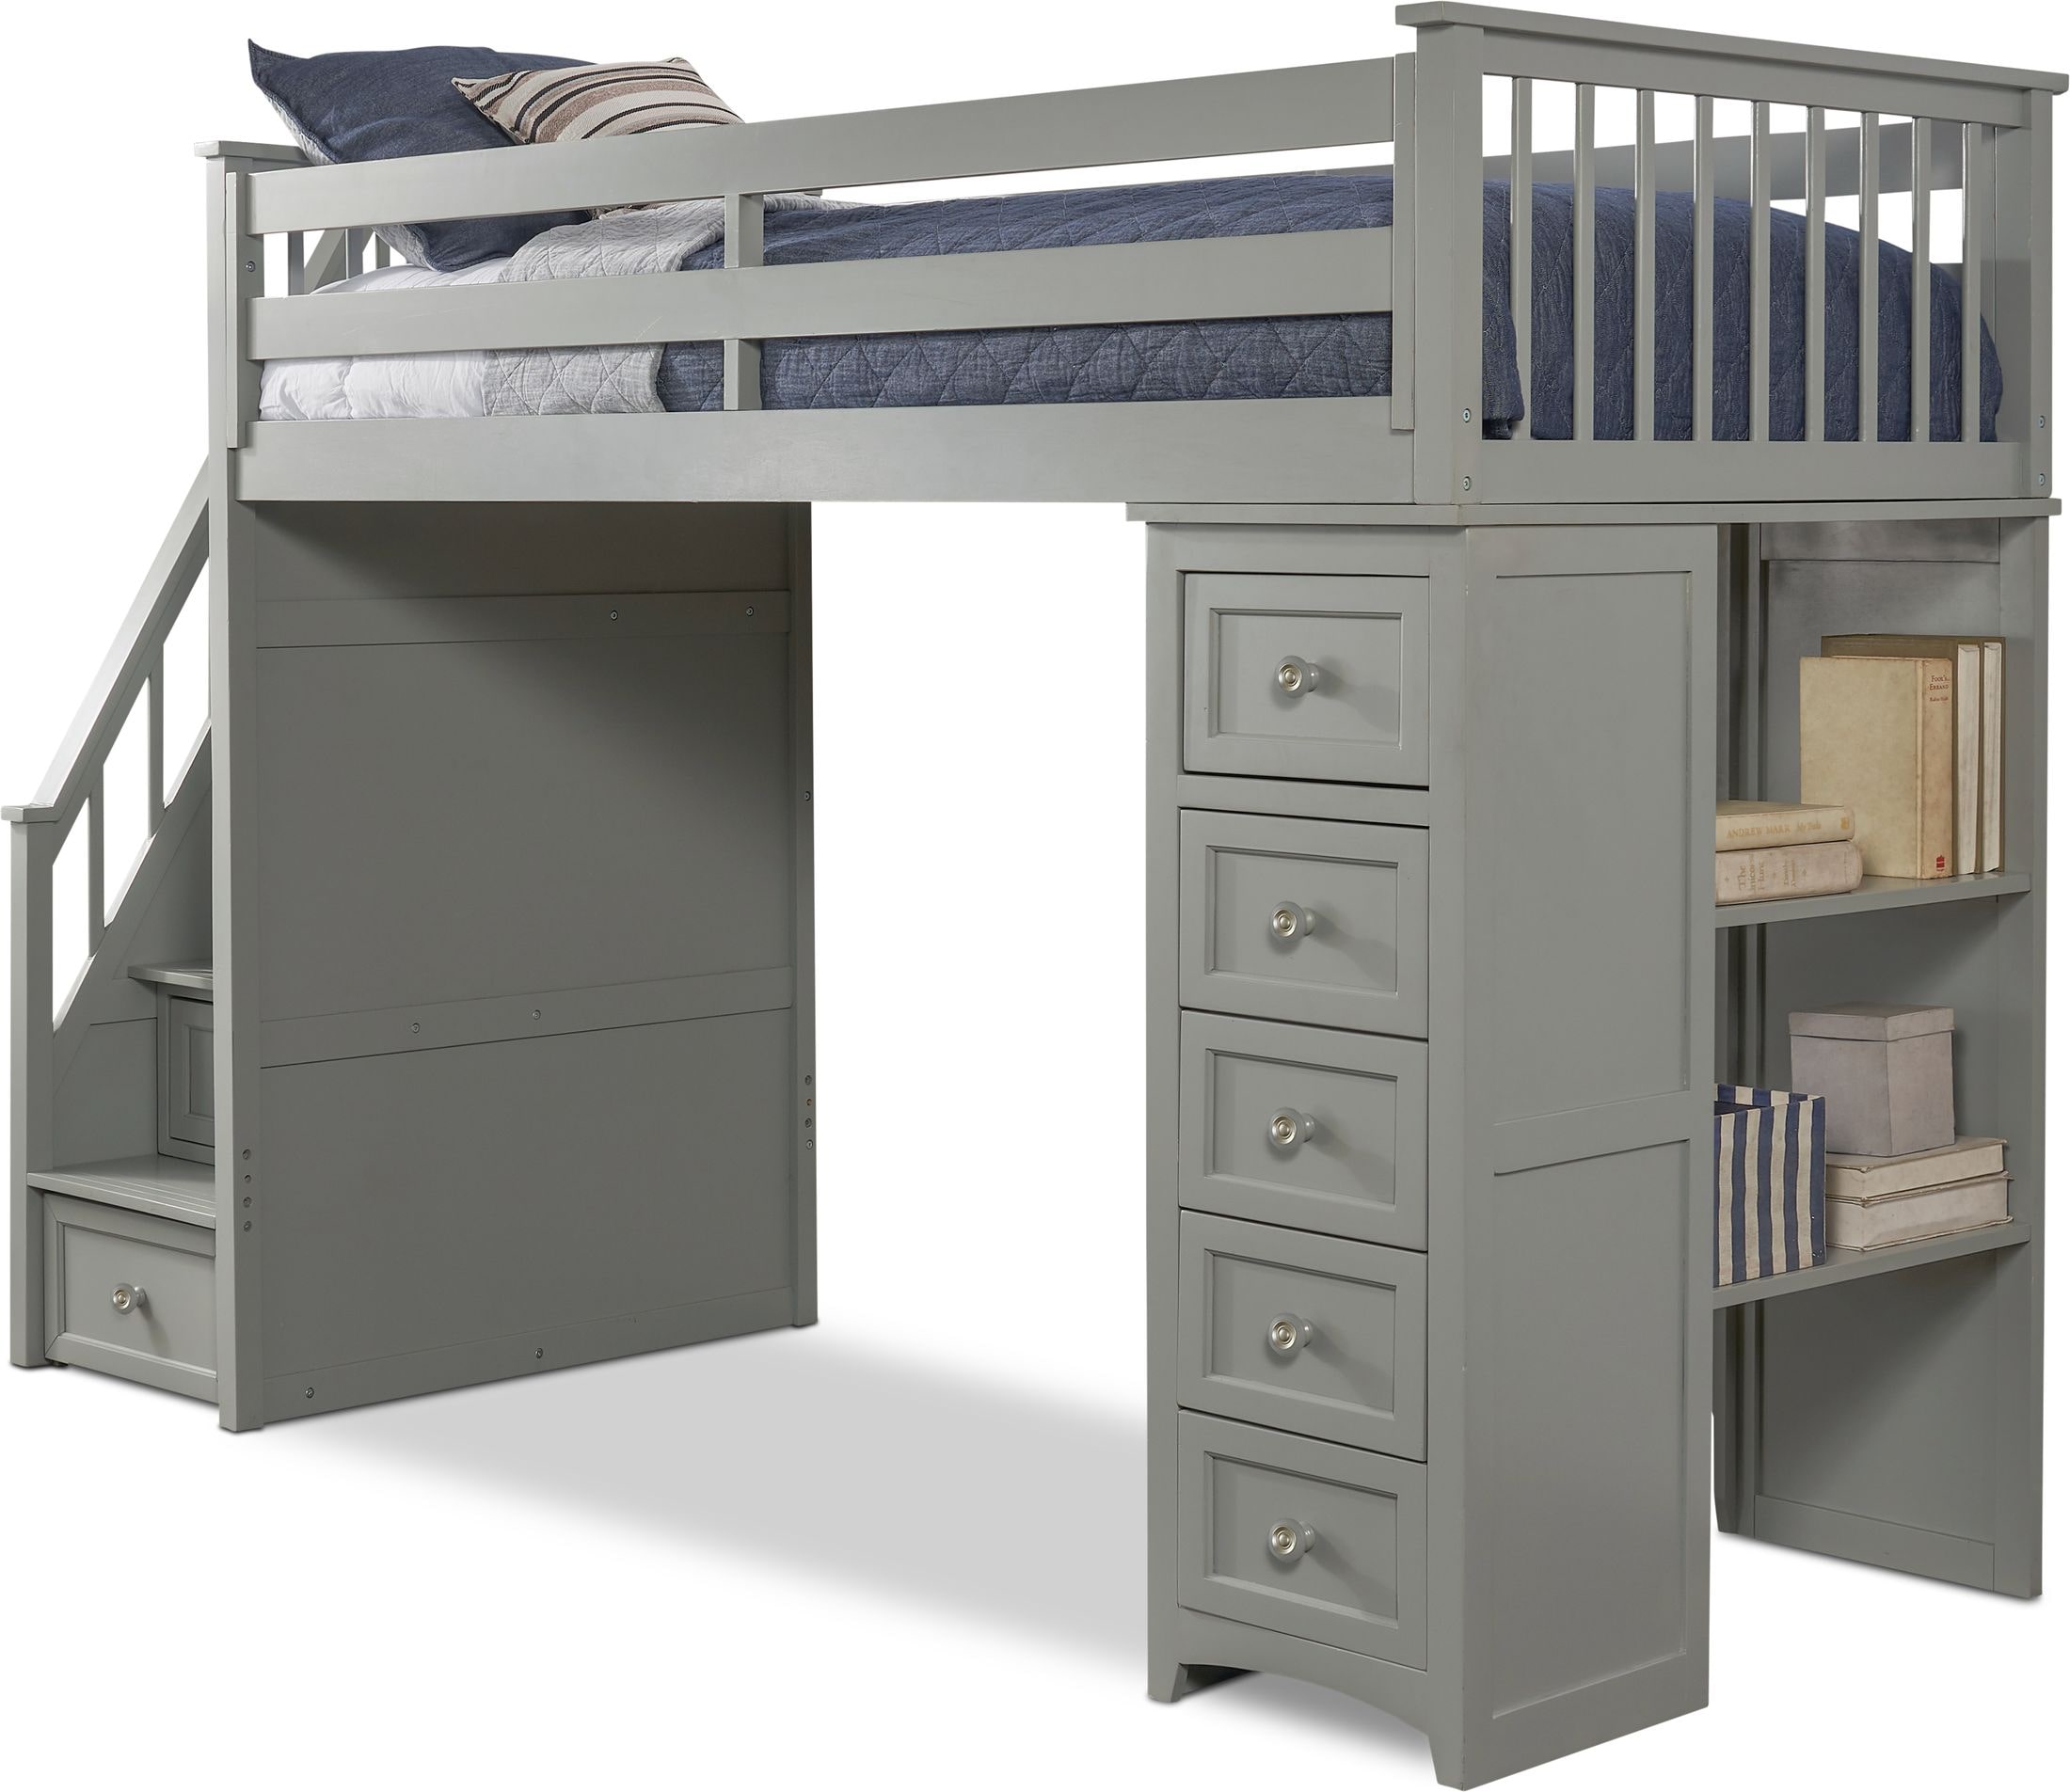 Undefined Value City Furniture, Value City Bunk Beds With Stairs